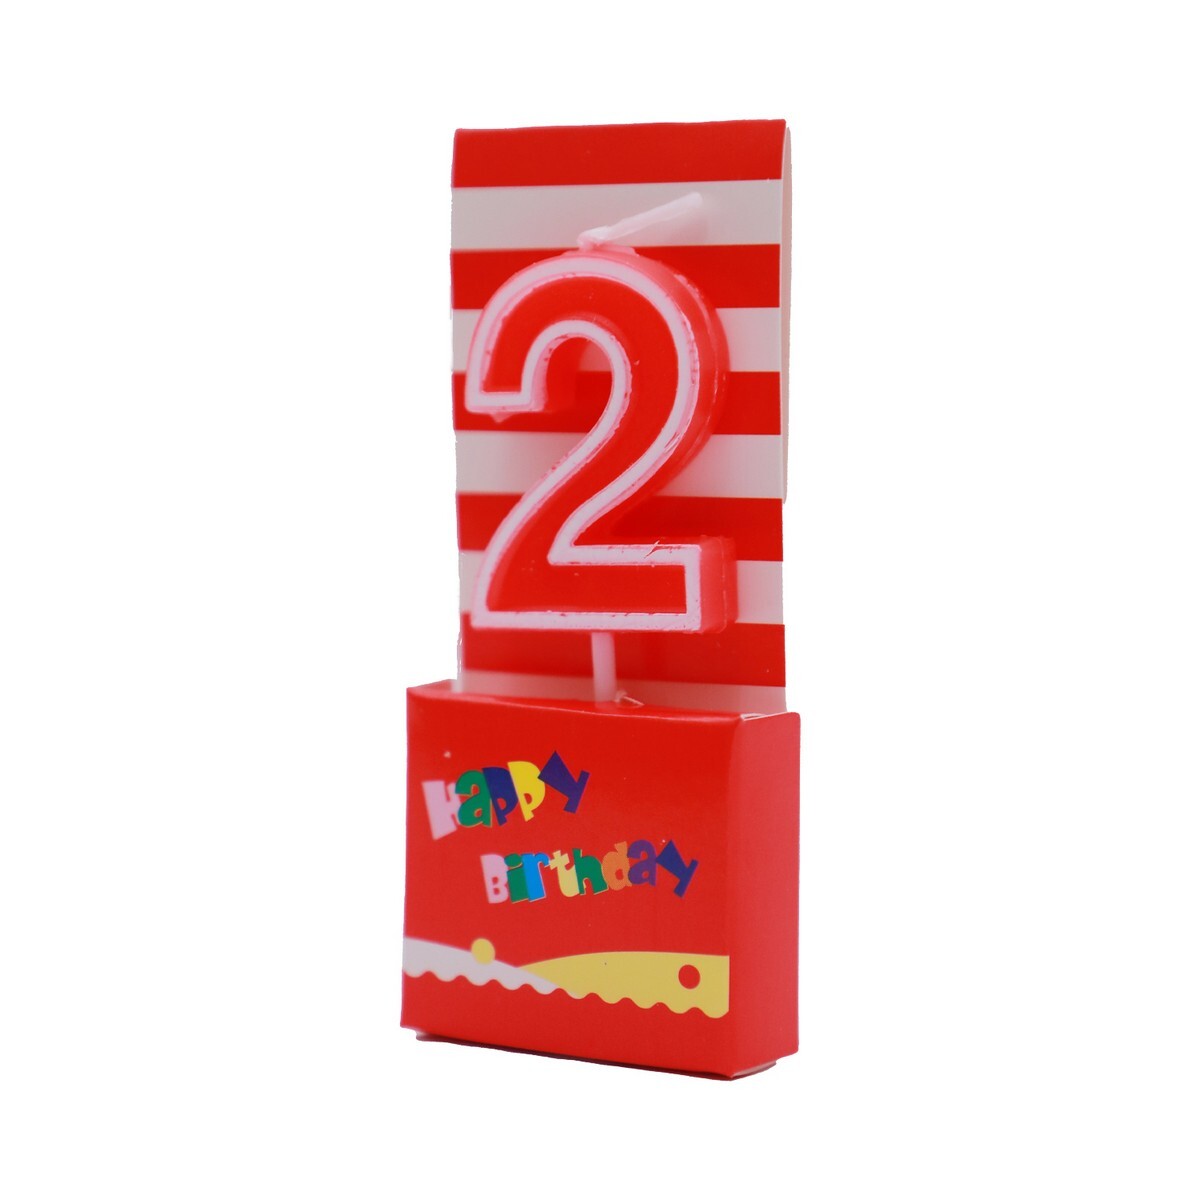 Party Fusion  BDay Number Candle PAC1142-2